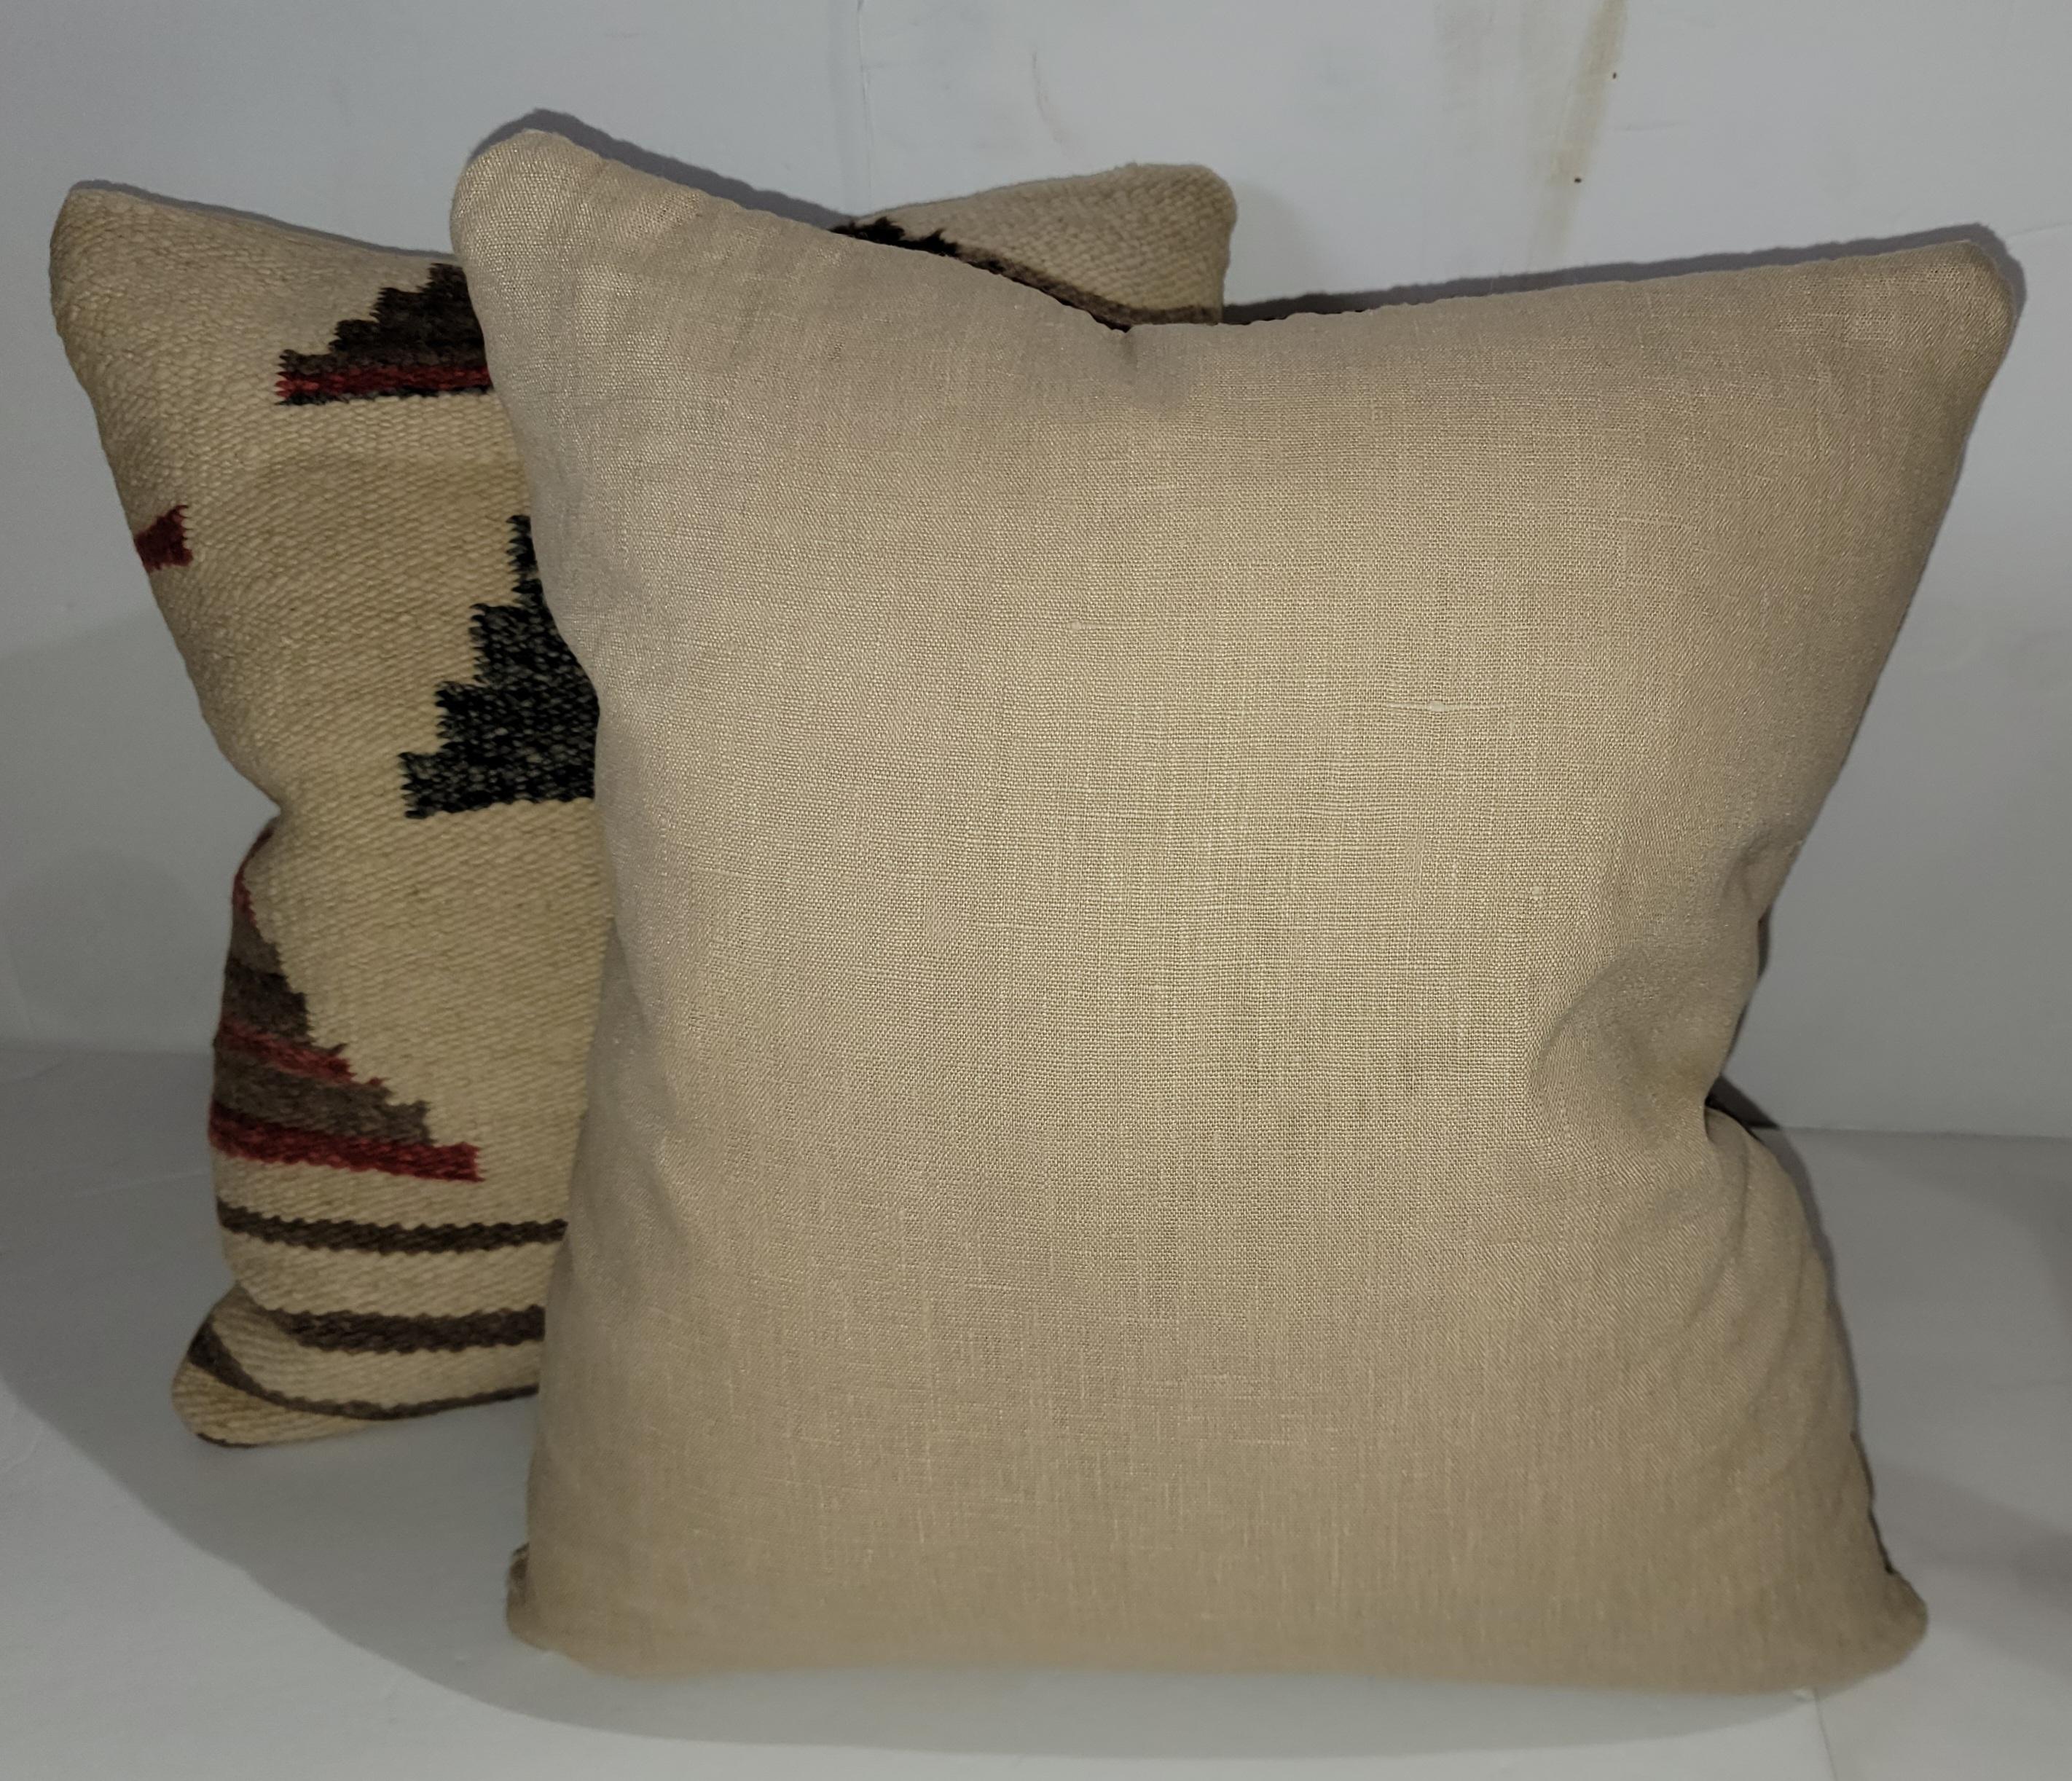 Pair of Indian weaving pillows. Down and feather inserts and zippered cases.
Measures: 15 x 17.